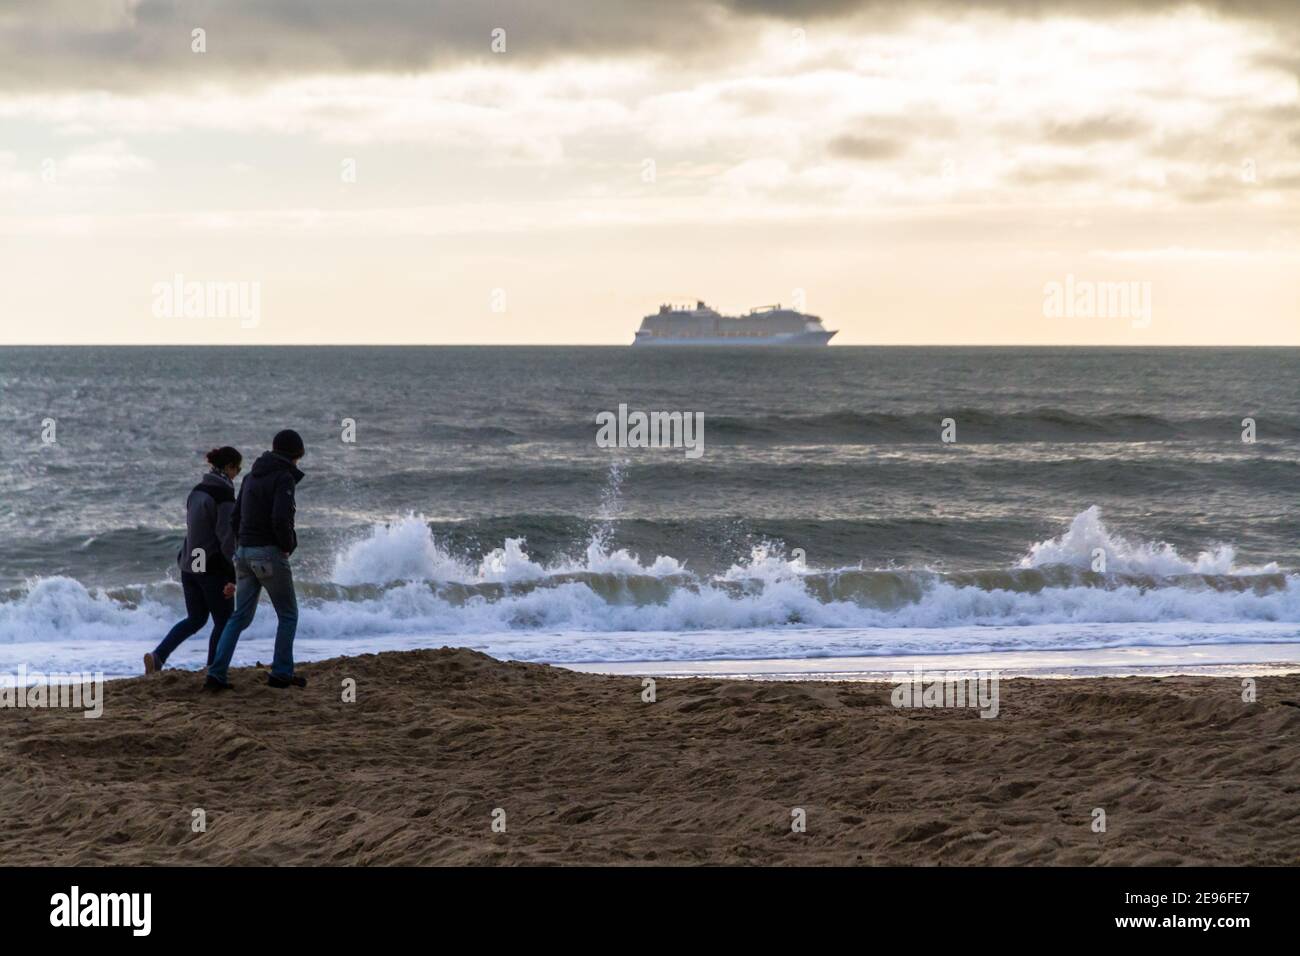 BOURNEMOUTH, ENGLAND - JANUARY 17 2021: Cruise ship moored off Bournemouth at Poole bay, two walkers on beach, landscape Stock Photo